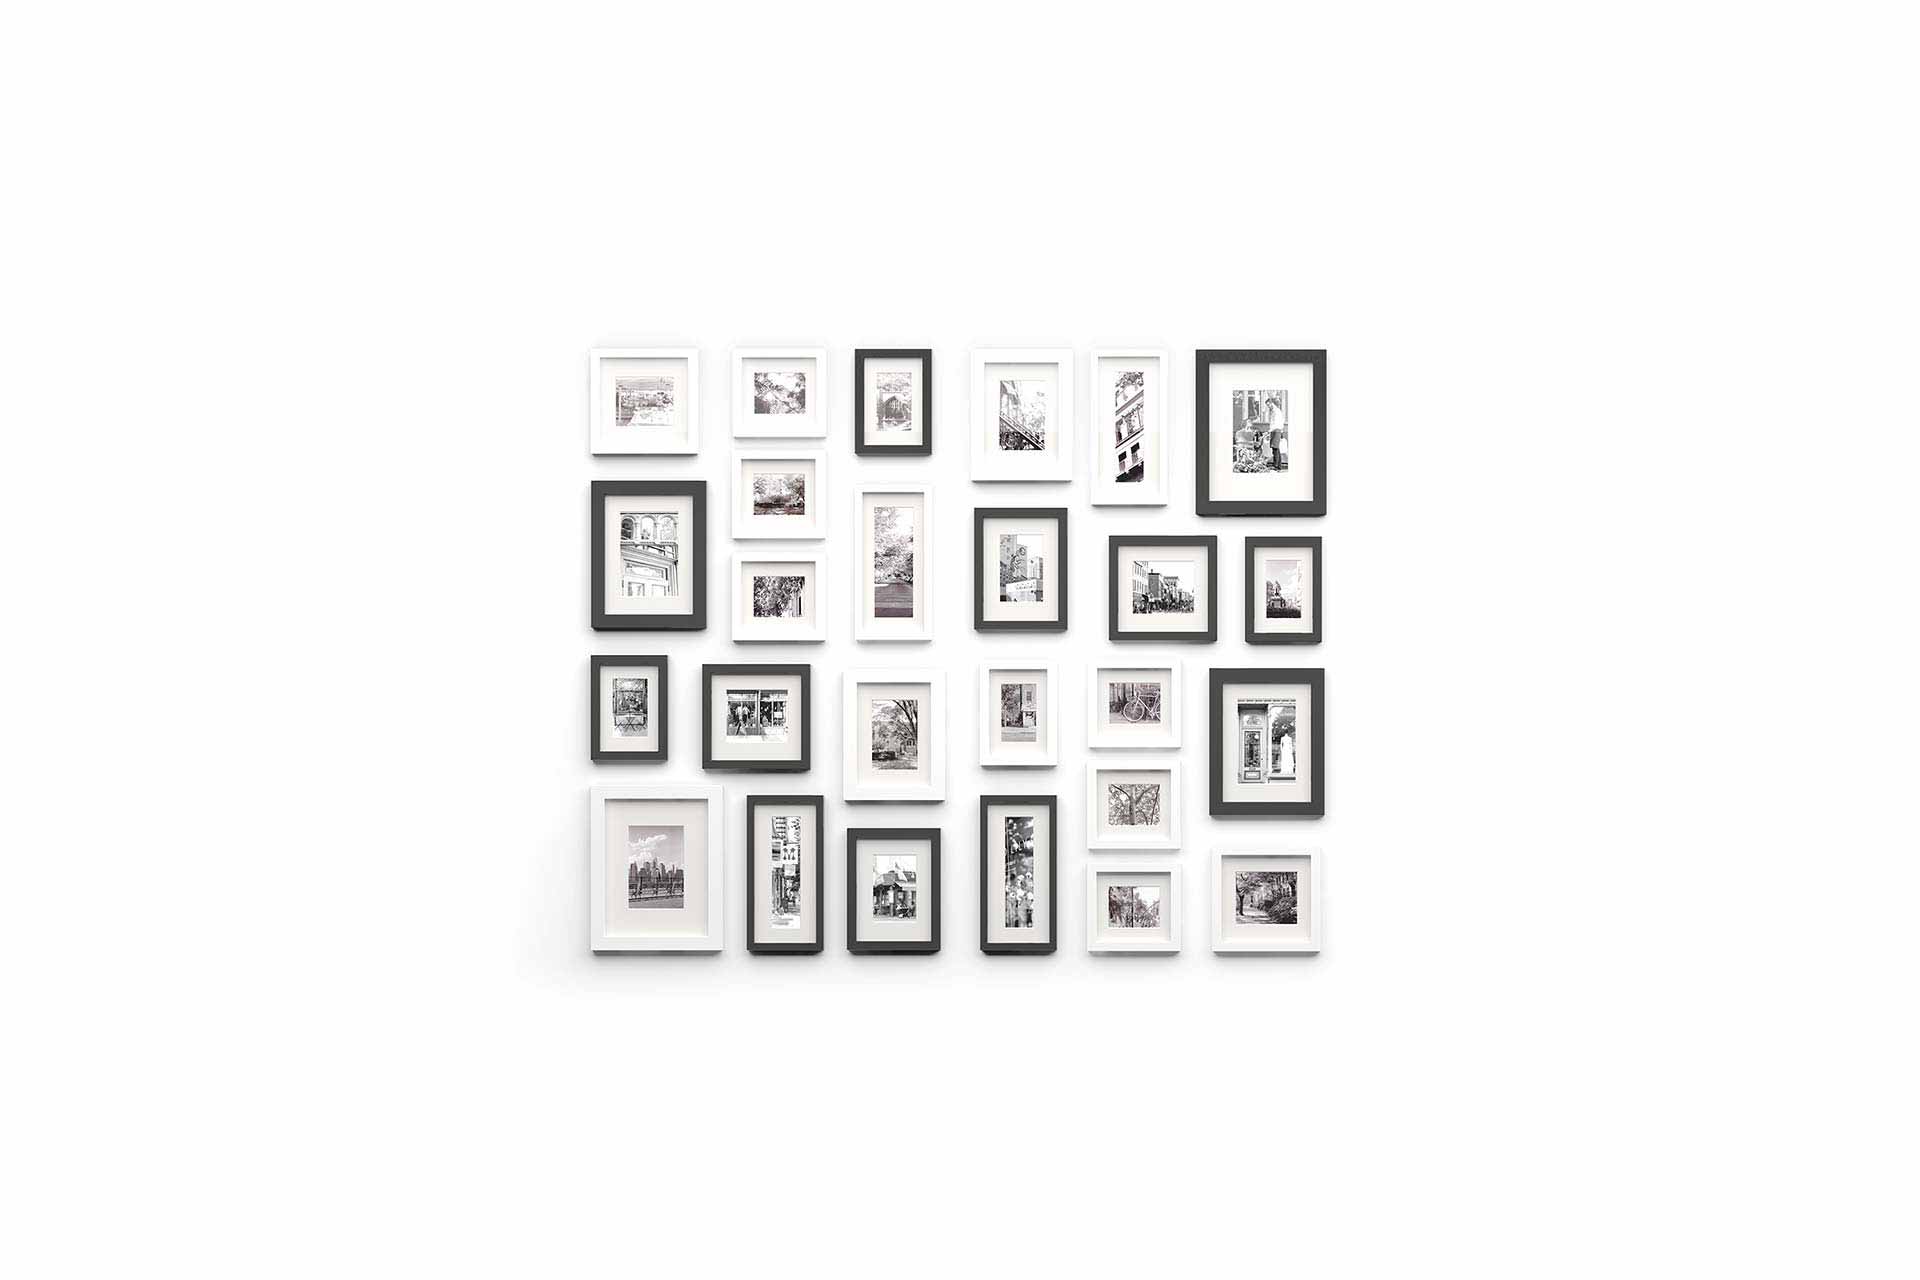 picture frames on wall